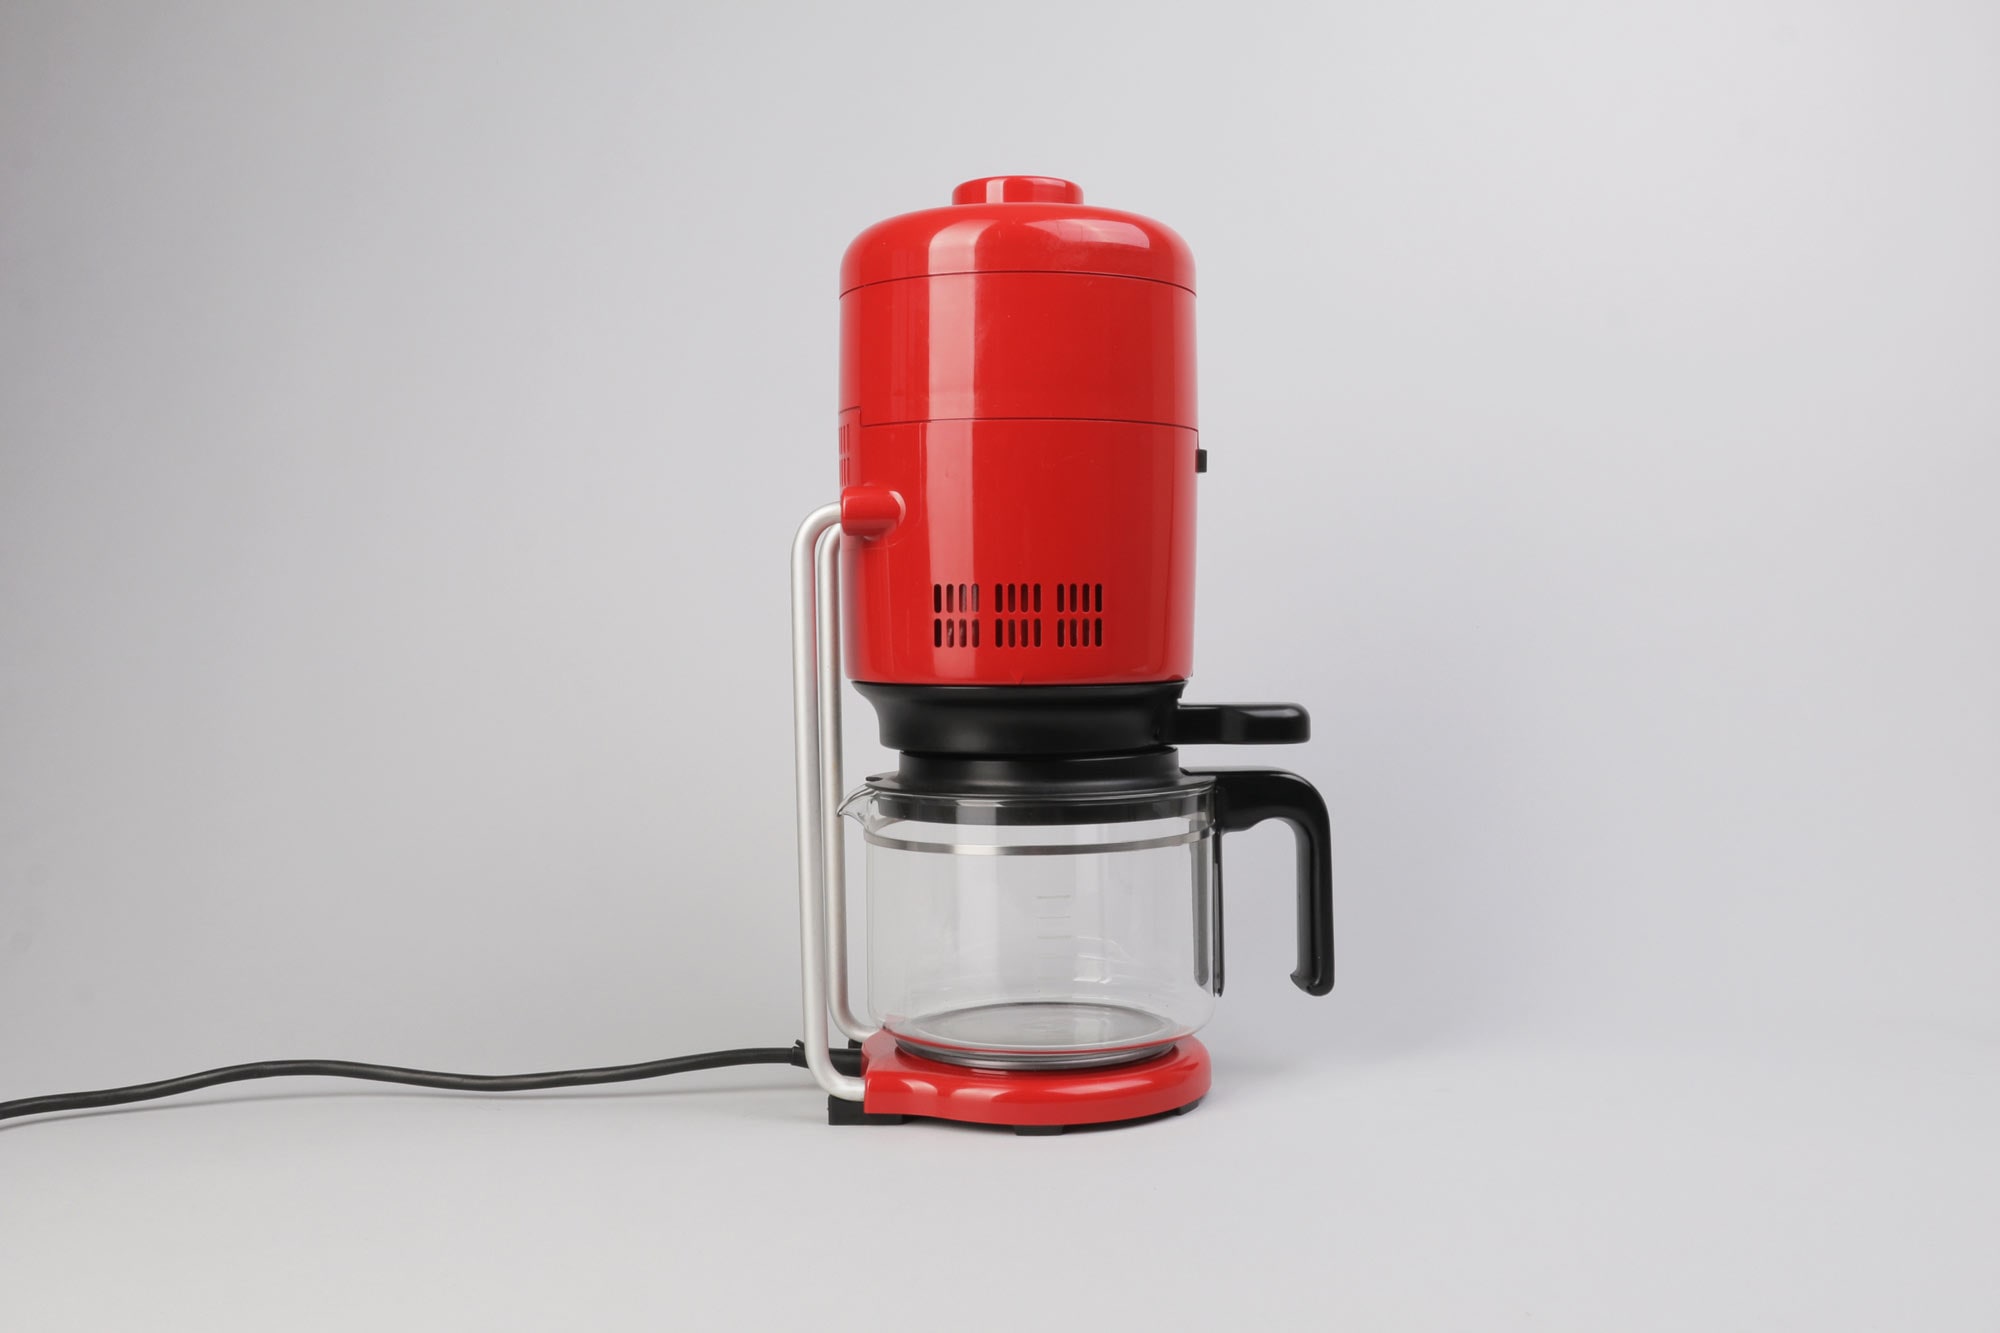 https://onlyonceshop.com/media/pages/product/braun-kf-20/668667f1c3-1650541407/iconic-braun-aromaster-kf-20-kf20-coffee-maker-in-orange-red-designed-by-florian-seiffert-germany-1972-only-once-shop-1.jpg